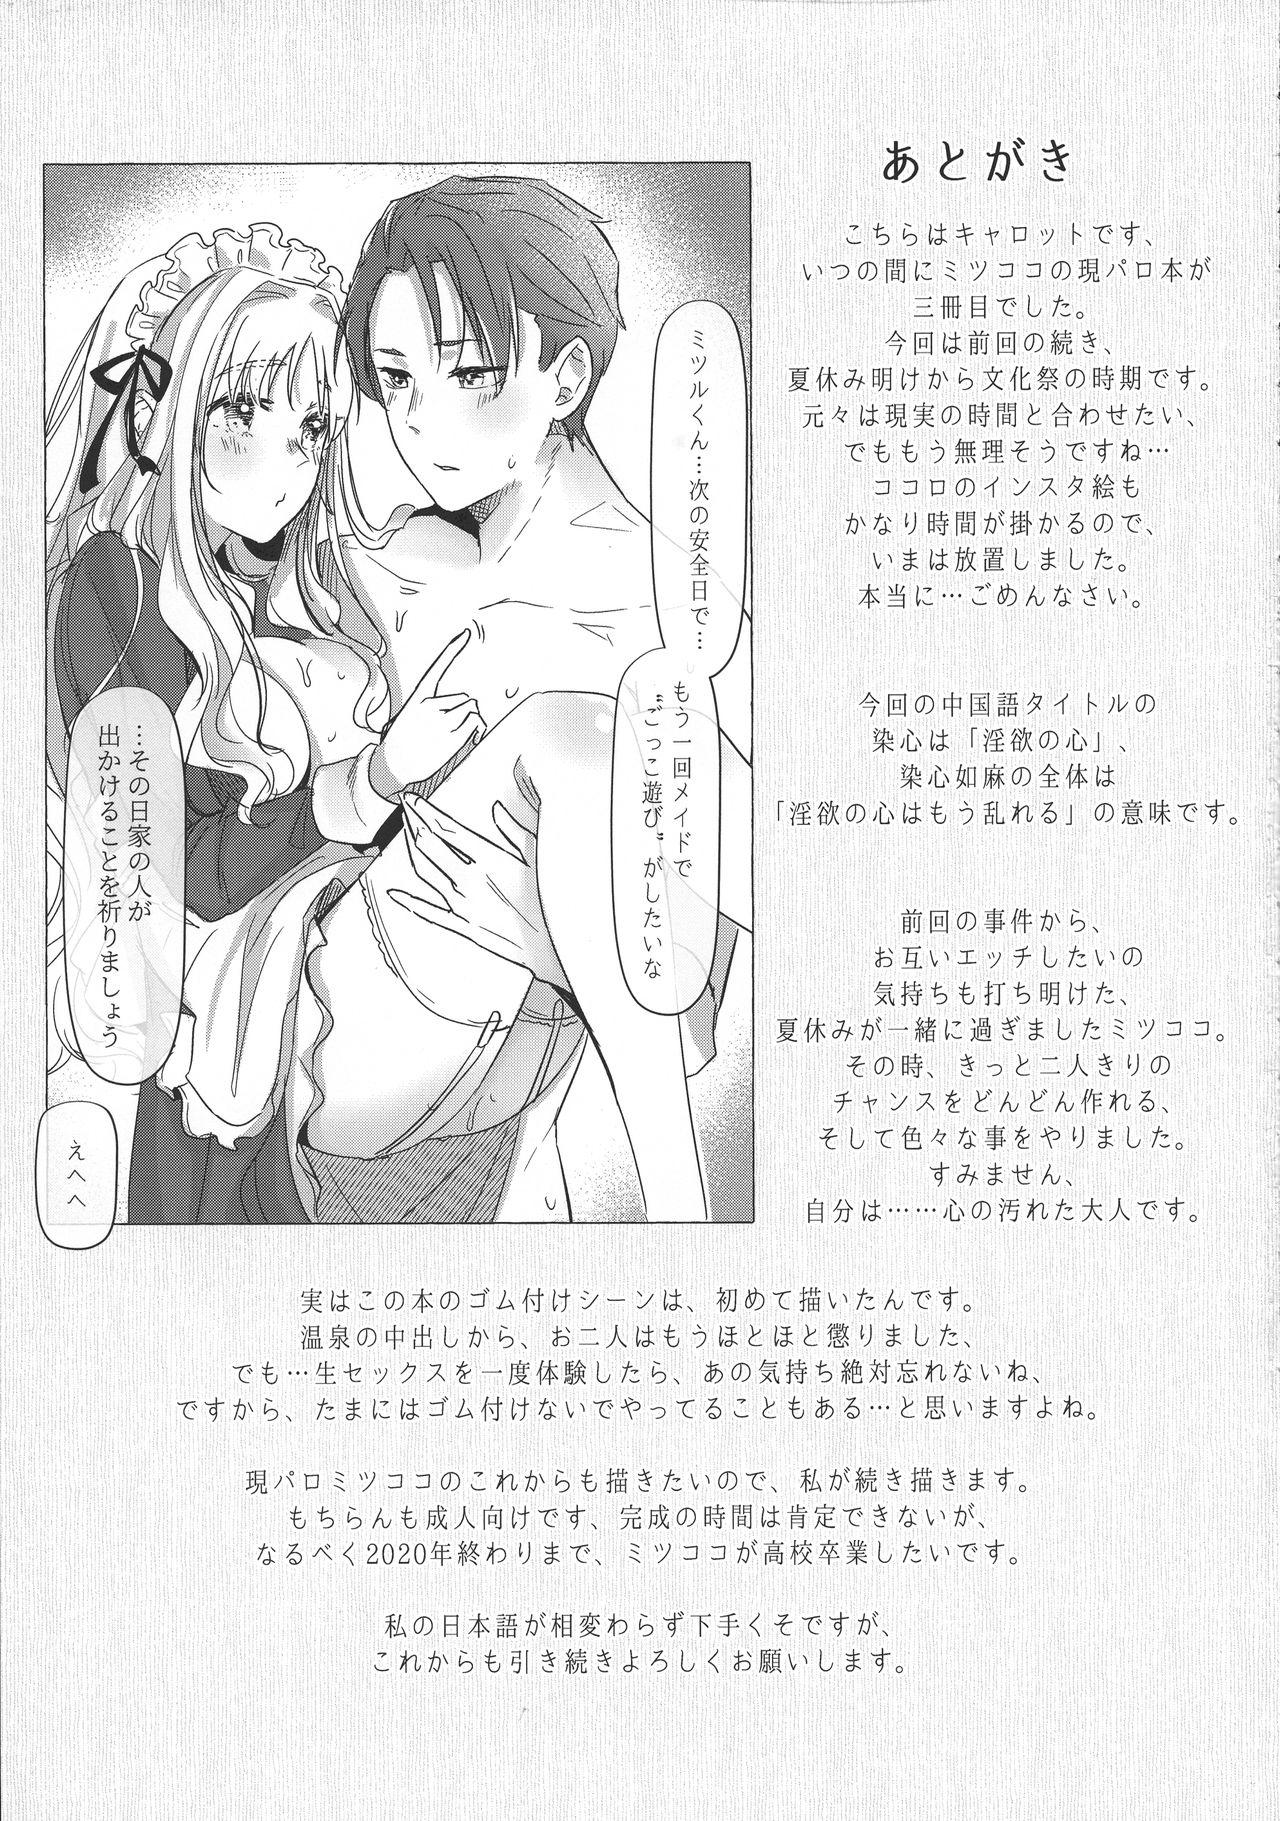 Blackmail 満心総意の躾 - Darling in the franxx Fucks - Page 46